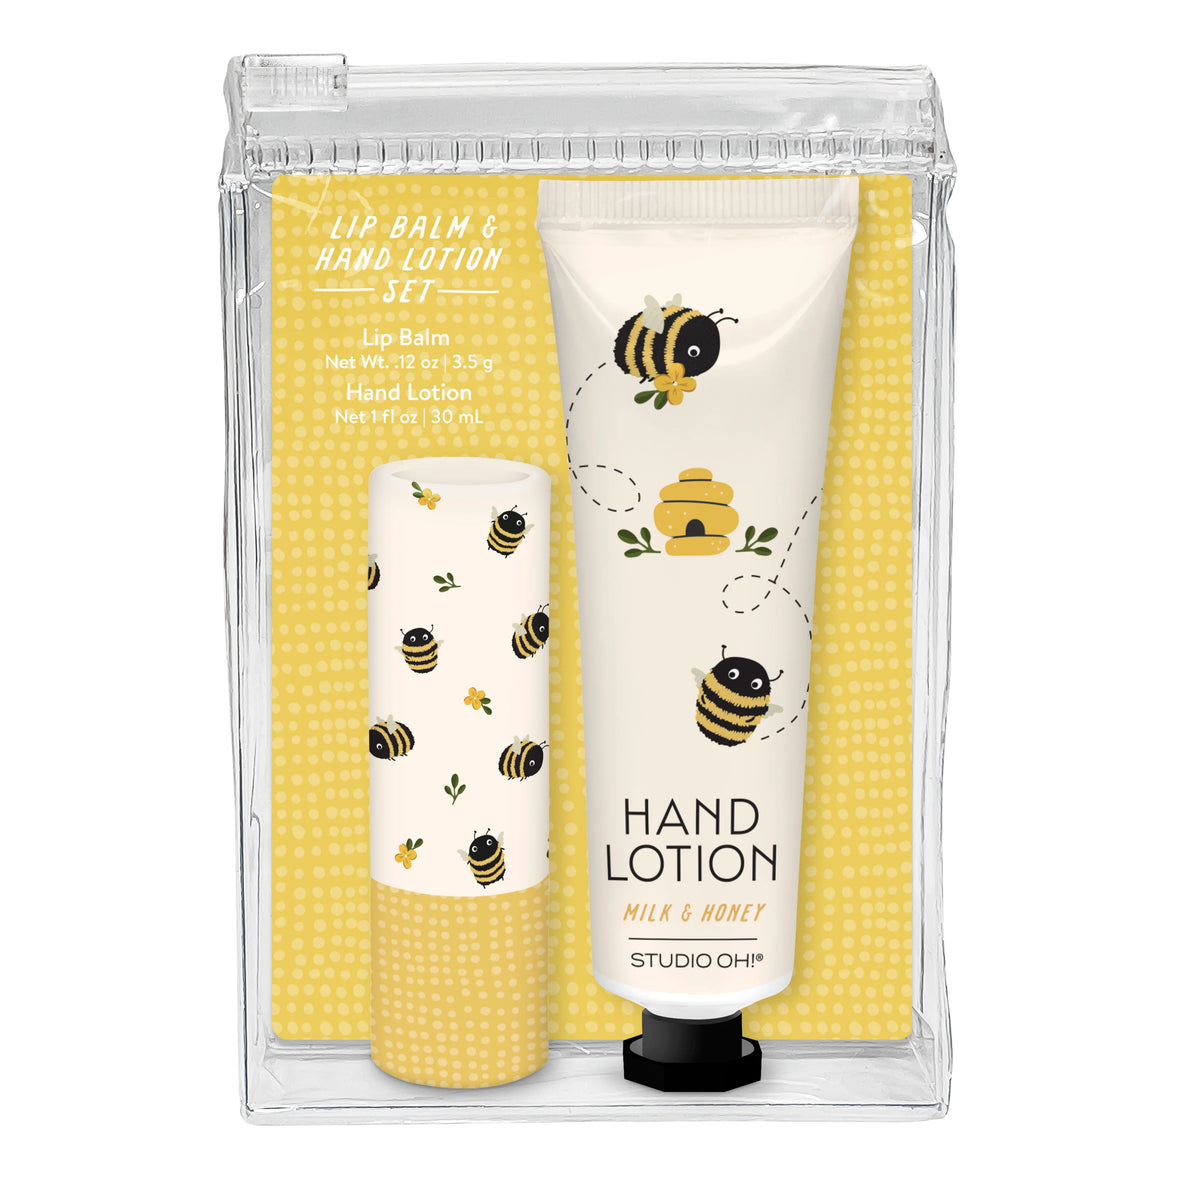 Buzzy Bees Lip Balm & Hand Lotion Set Cover